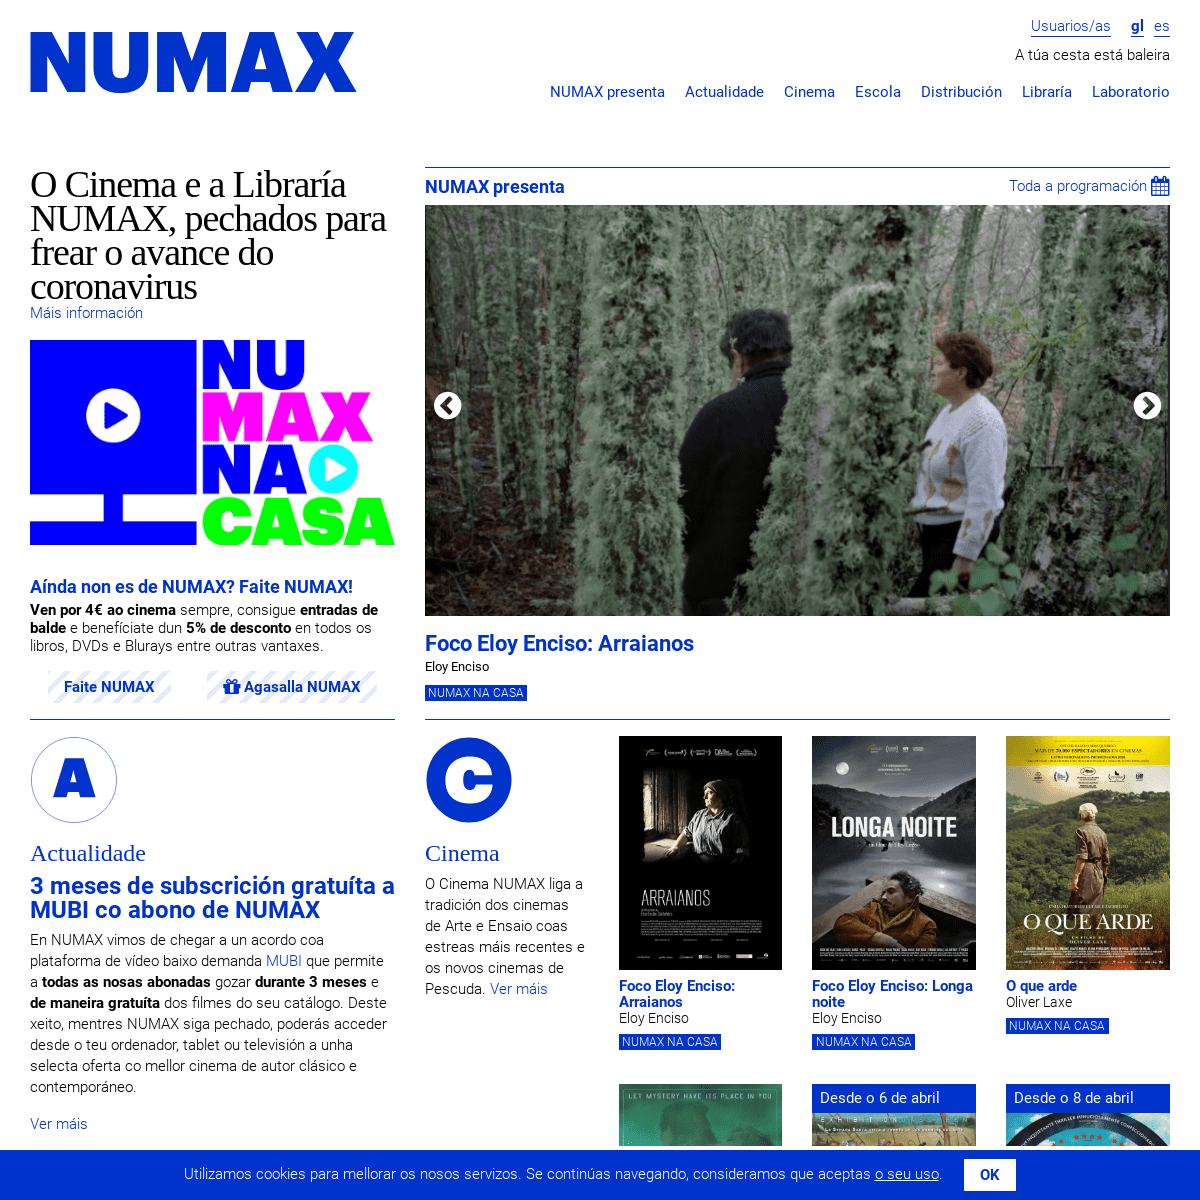 A complete backup of numax.org